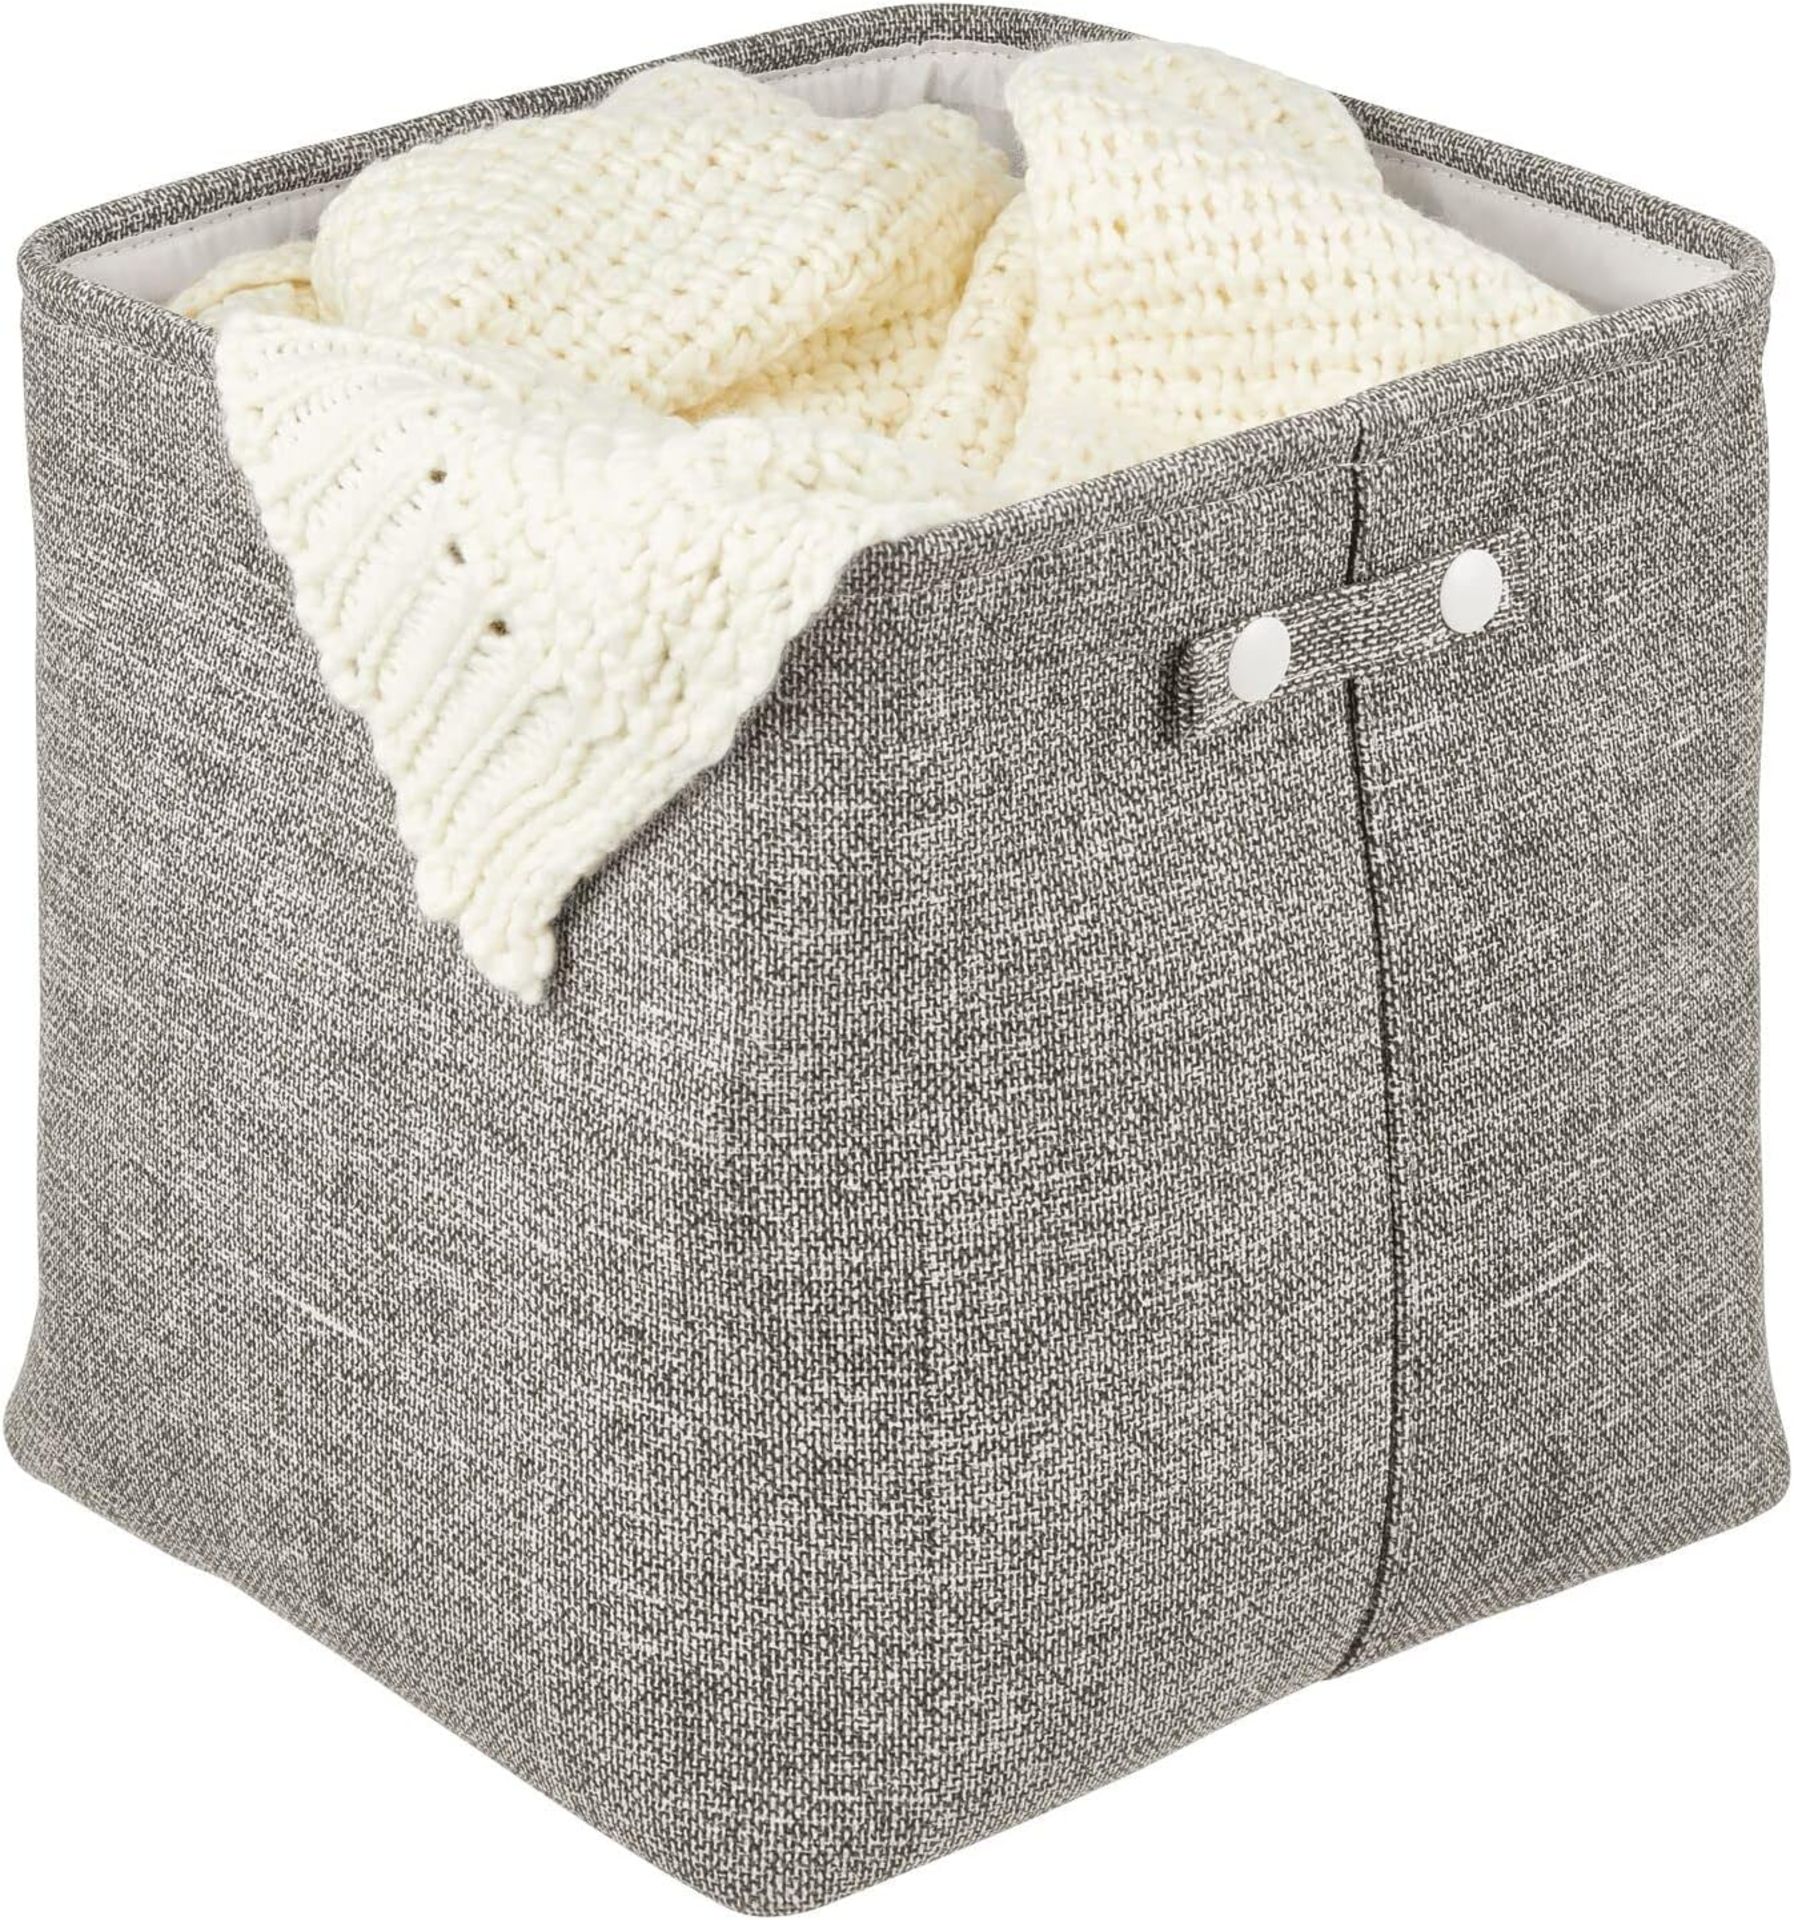 mDesign Fabric Storage Box — Household Storage Basket with Integrated Handles — Perfect for